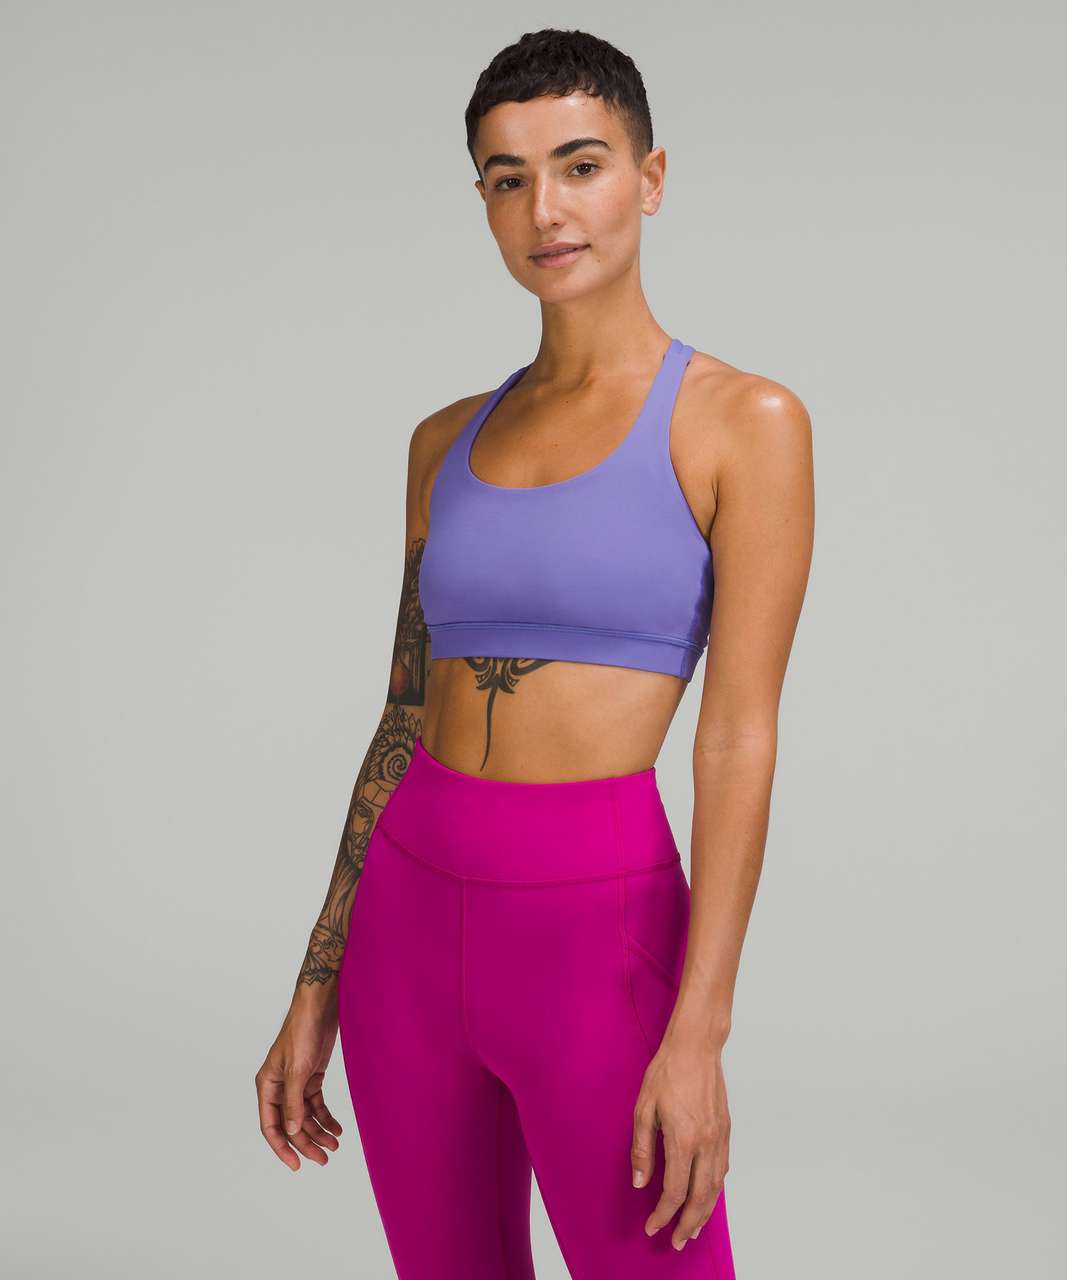 OOTD] Energy Bra in Electric Lemon (size 8) and WT 8” shorts in Charged  Indigo (sized up to a size 6). : r/lululemon